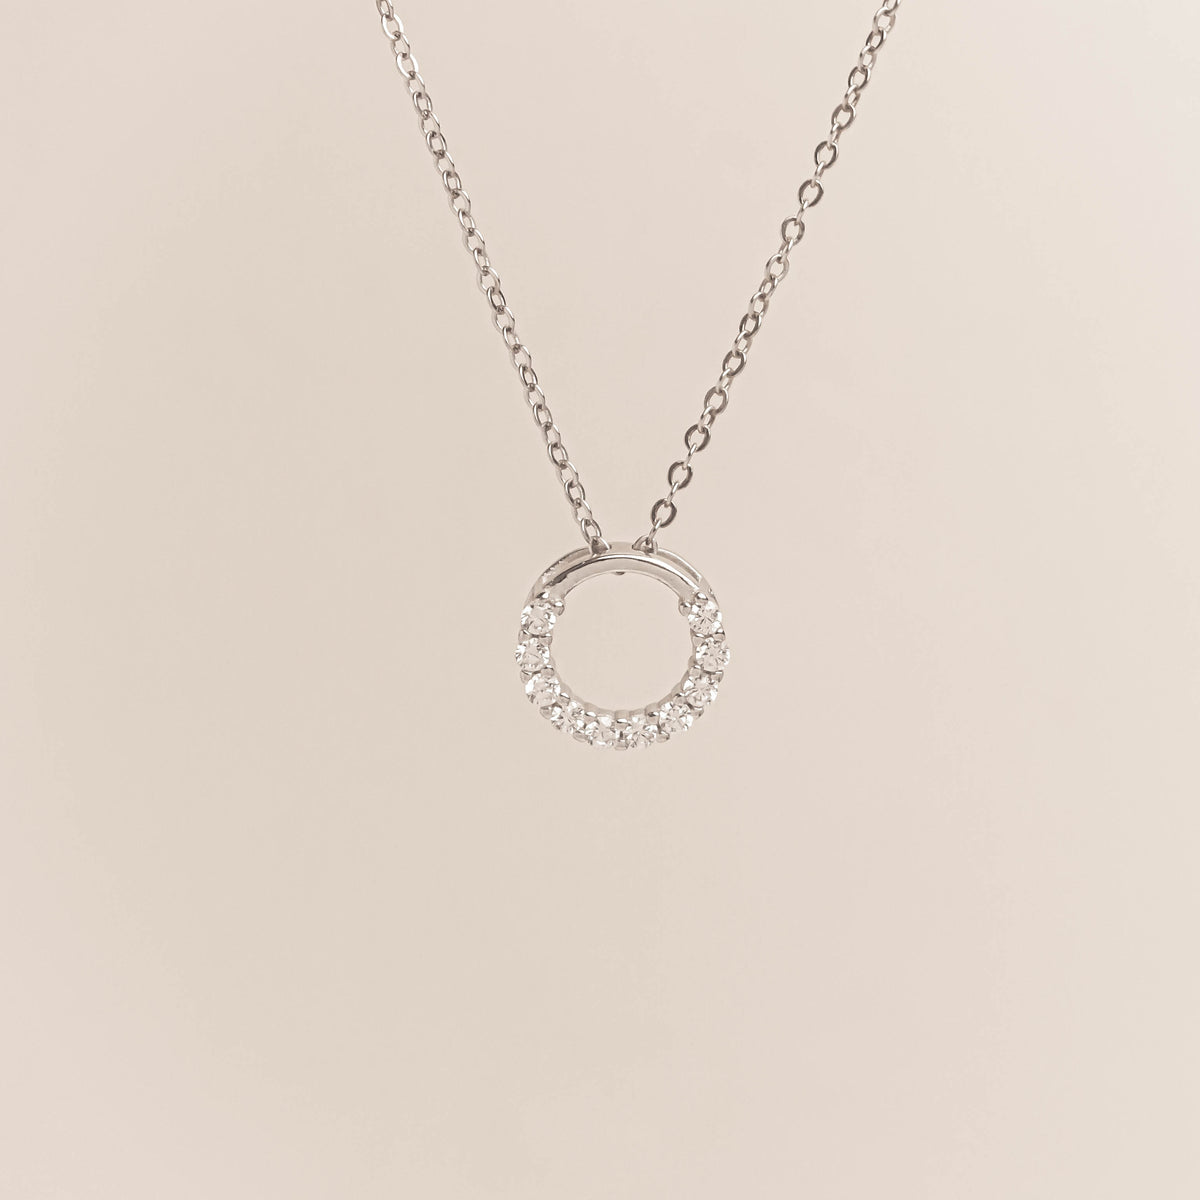 Shiny Wreath Necklace in 18K White Gold Plated